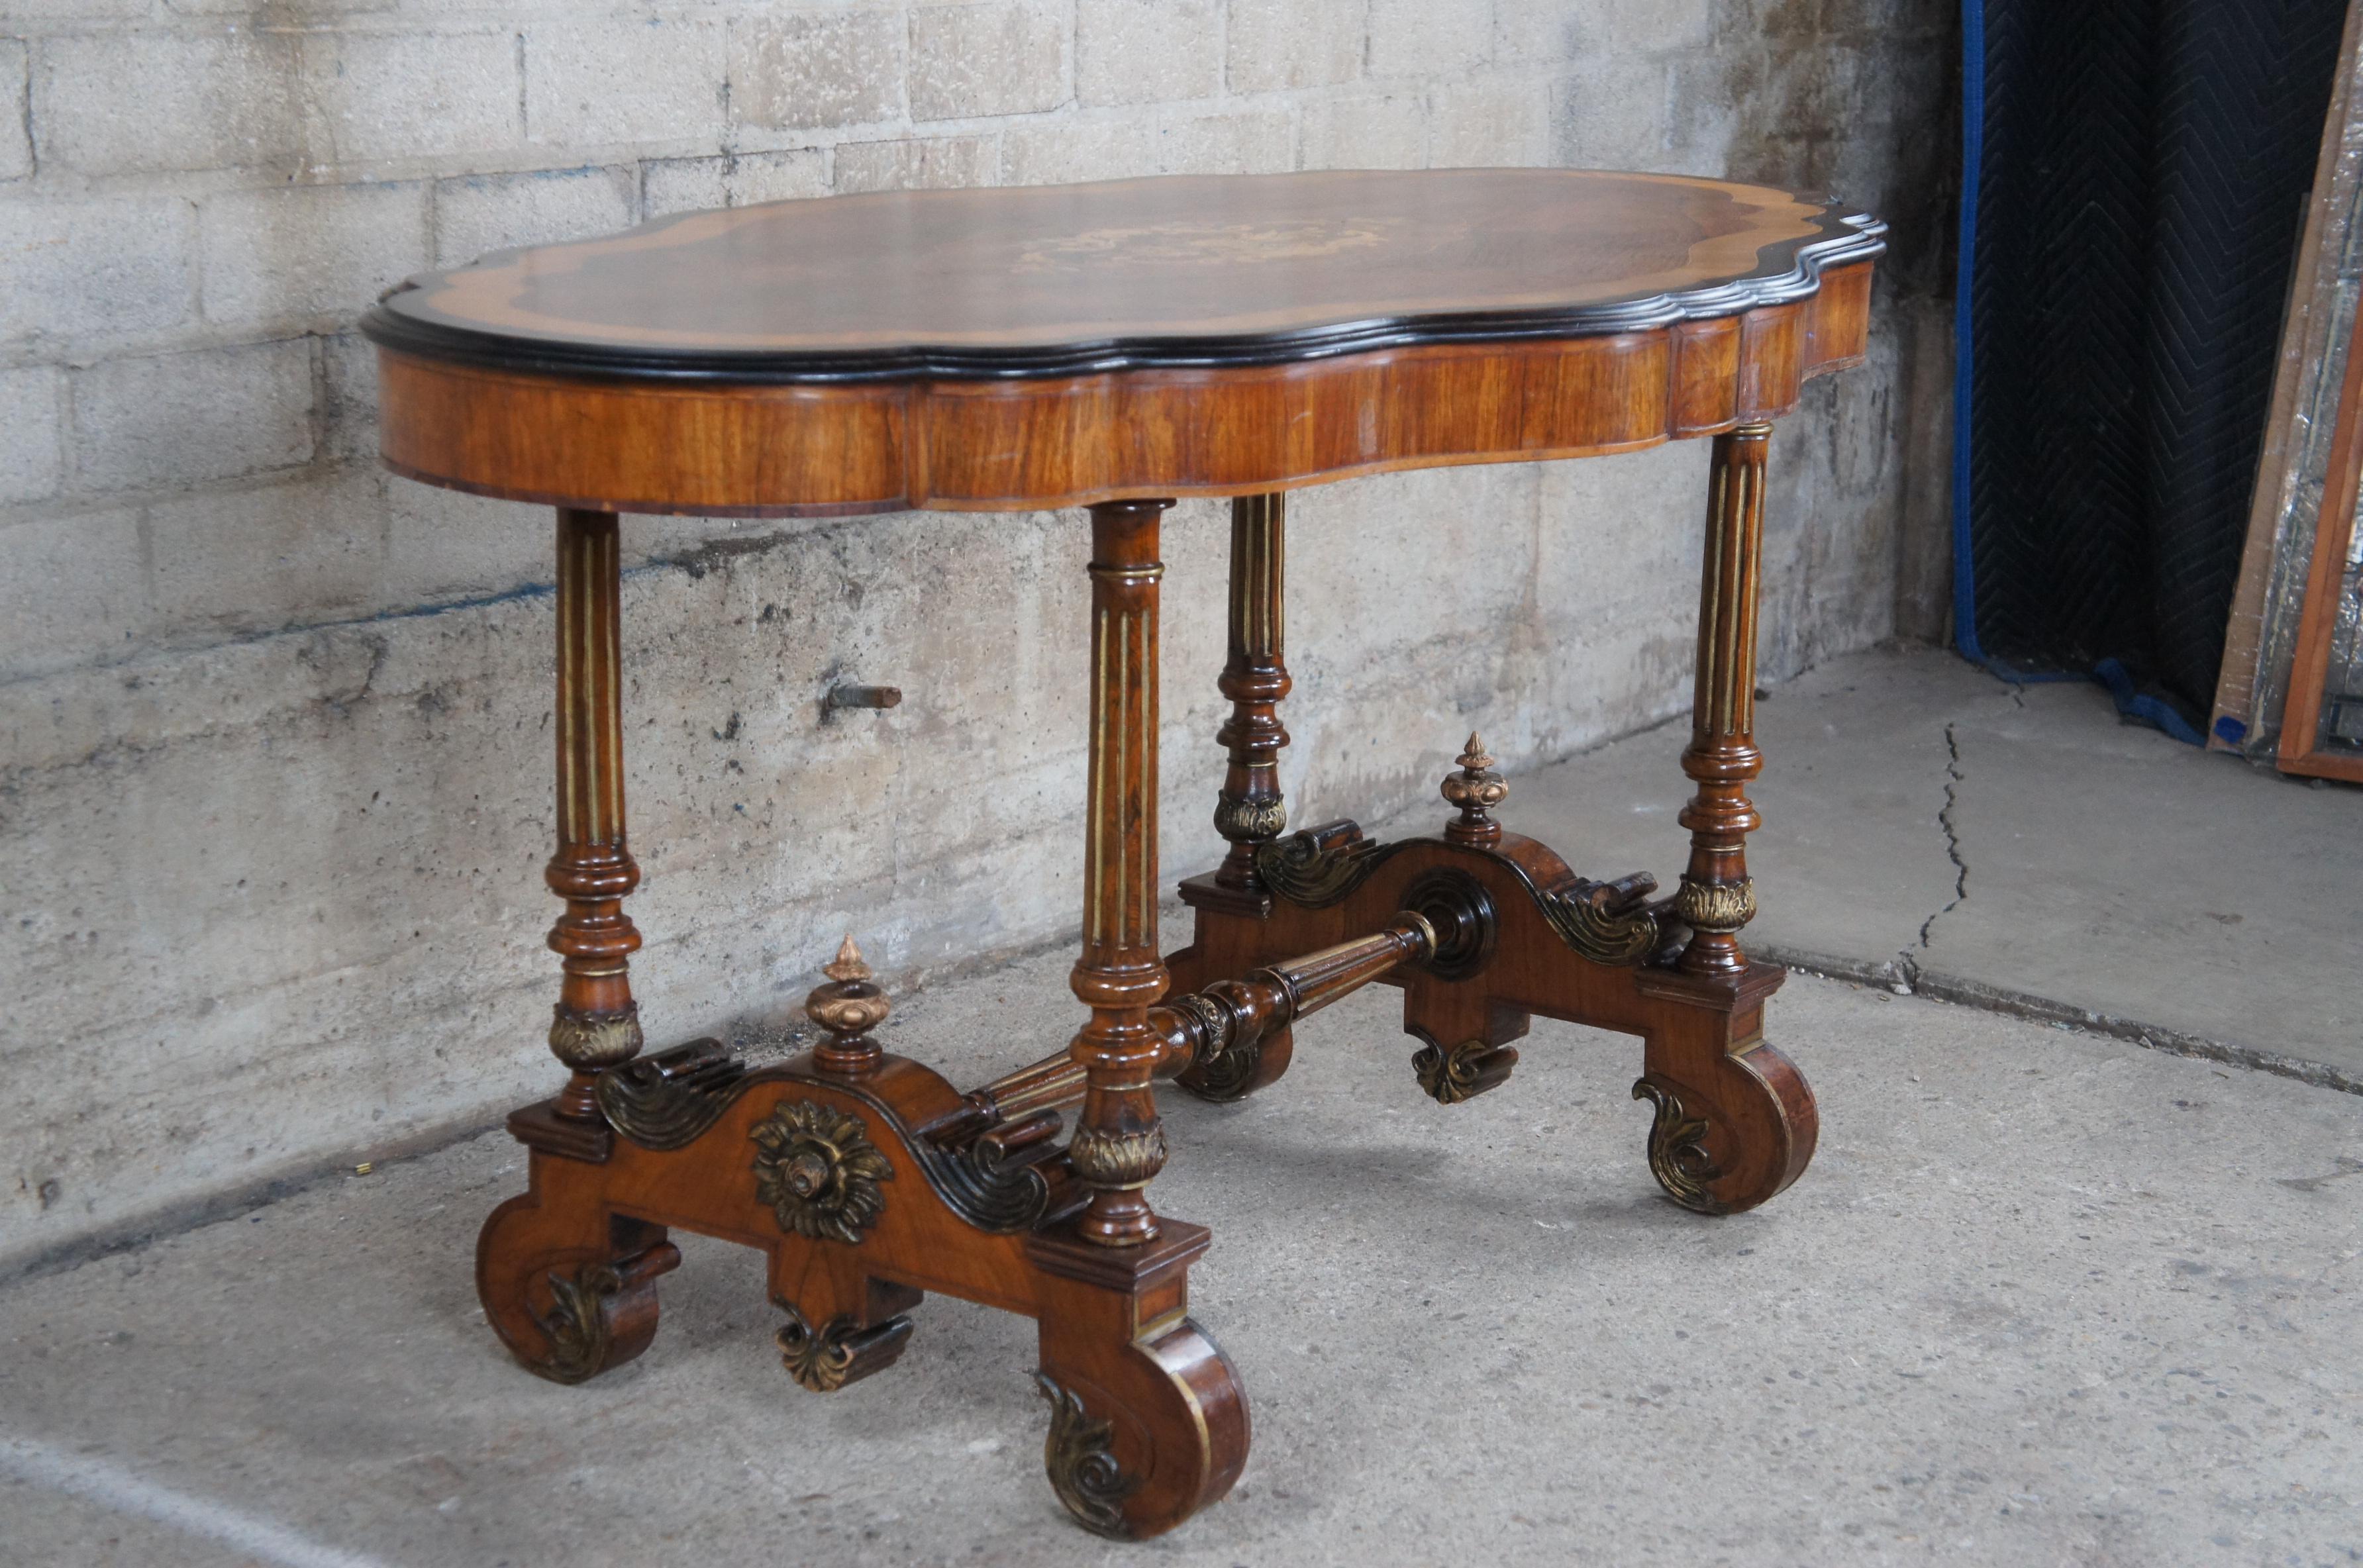 19th Century Antique American Renaissance Revival Serpentine Walnut Marquetry Center Table For Sale